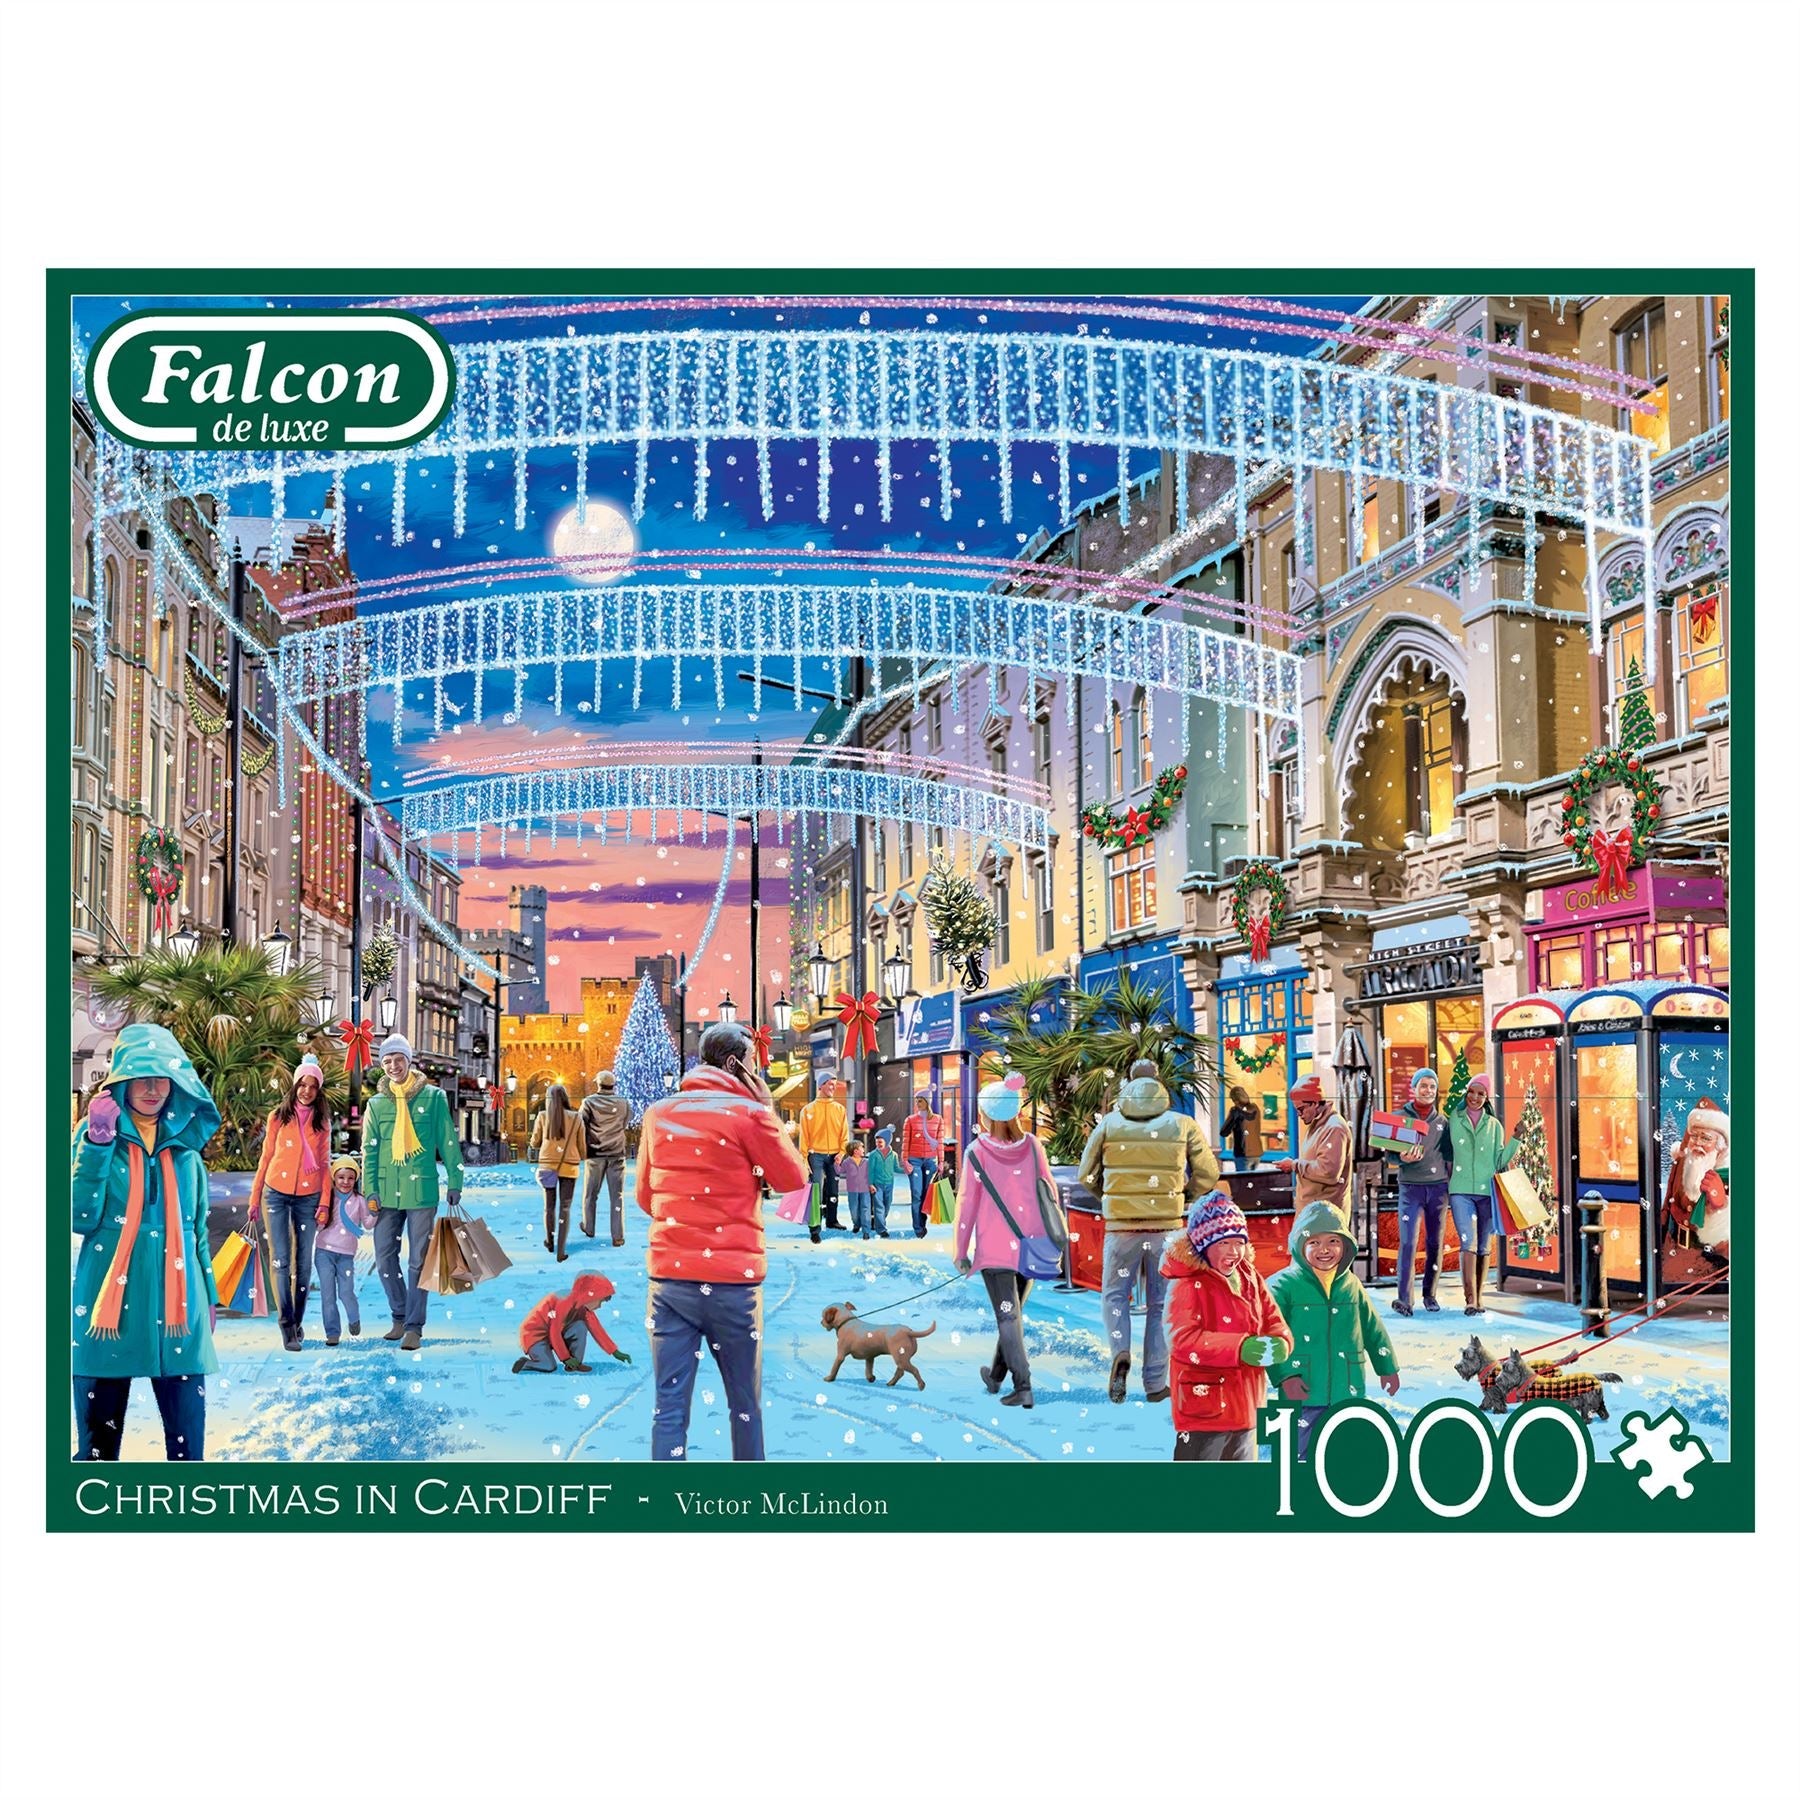 Christmas in Cardiff 1000 Piece jigsaw puzzle box